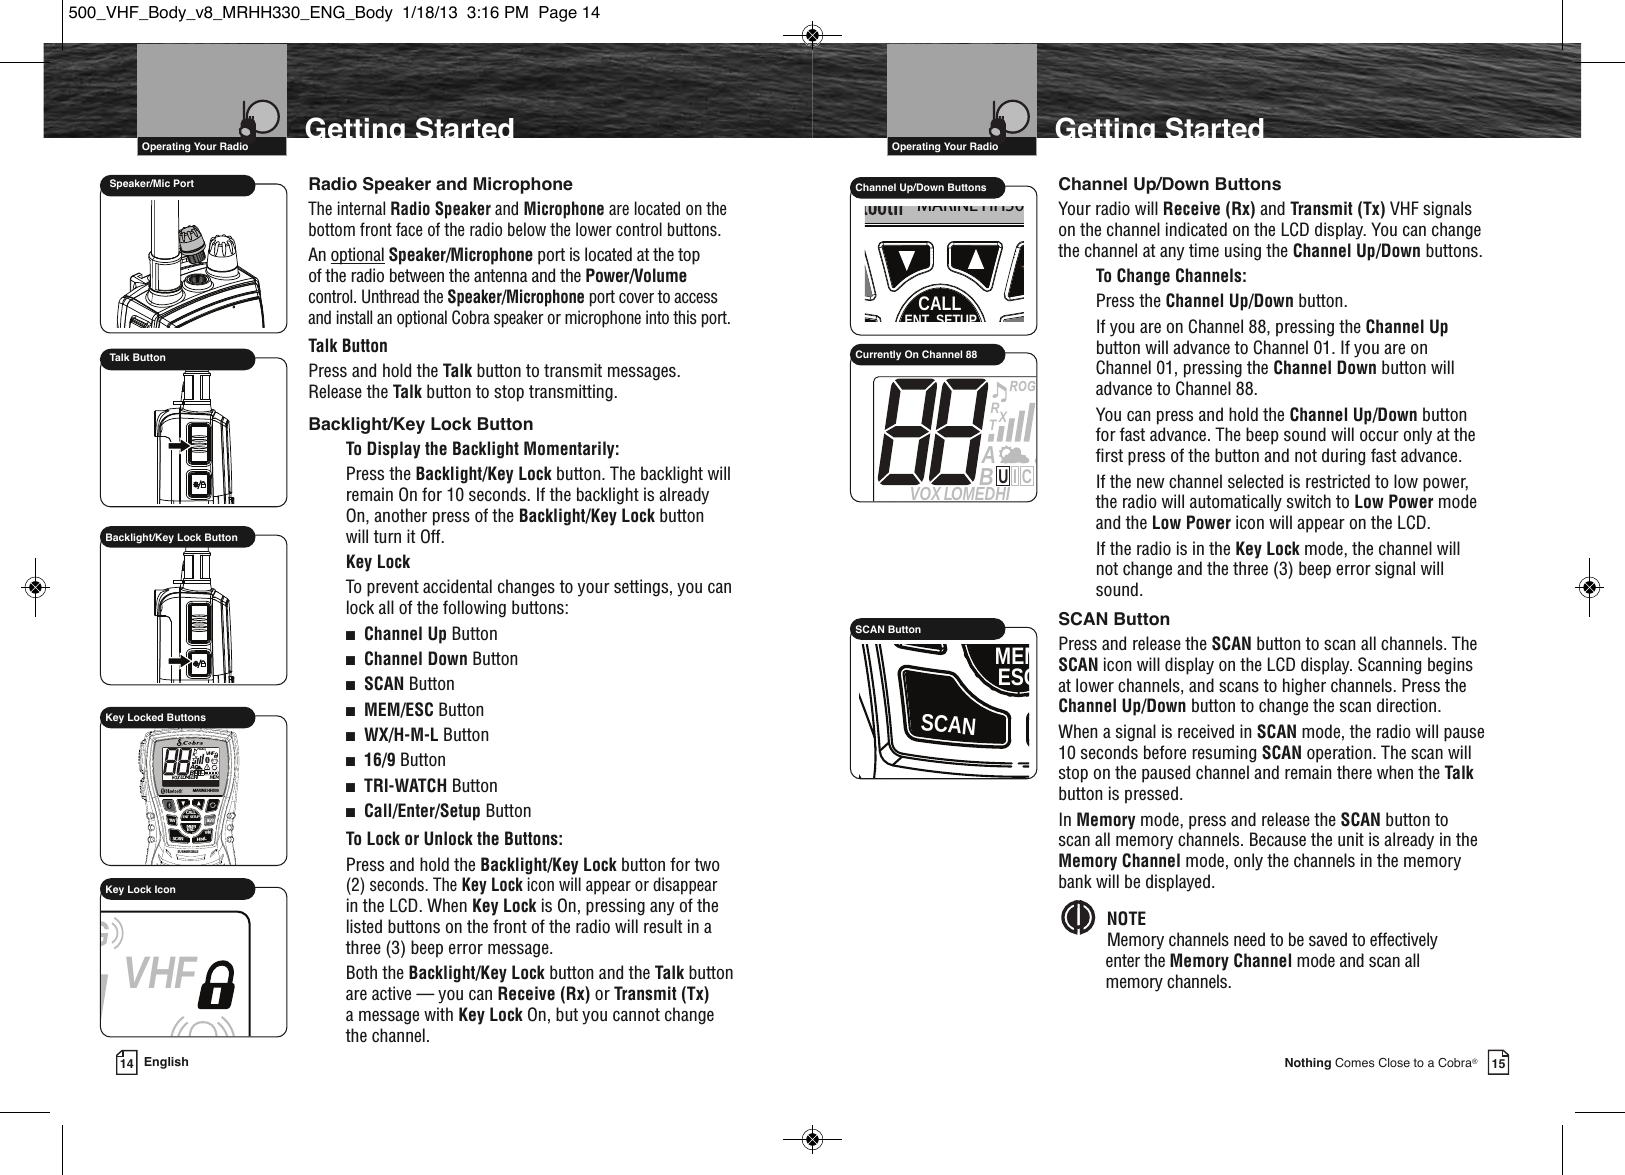 Page 10 of Cobra Electronics MRHH500 BT ACCESSORY IN MARINE RADIO User Manual MRHH330 ENG Body